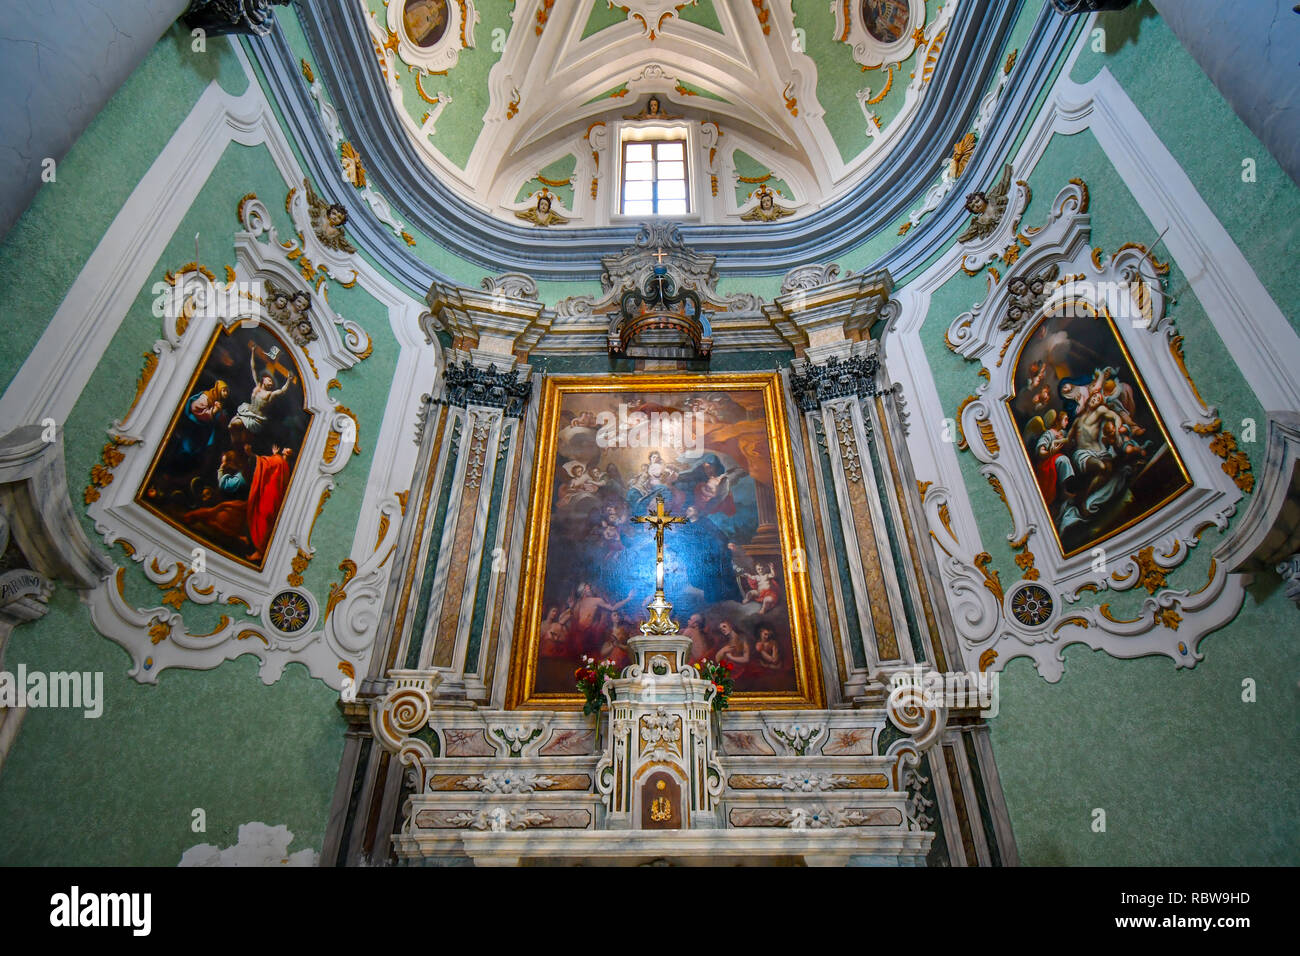 Matera, Italy - September 22 2018: The ornate, baroque interior of the Church of the Purgatory in Matera, Italy Stock Photo